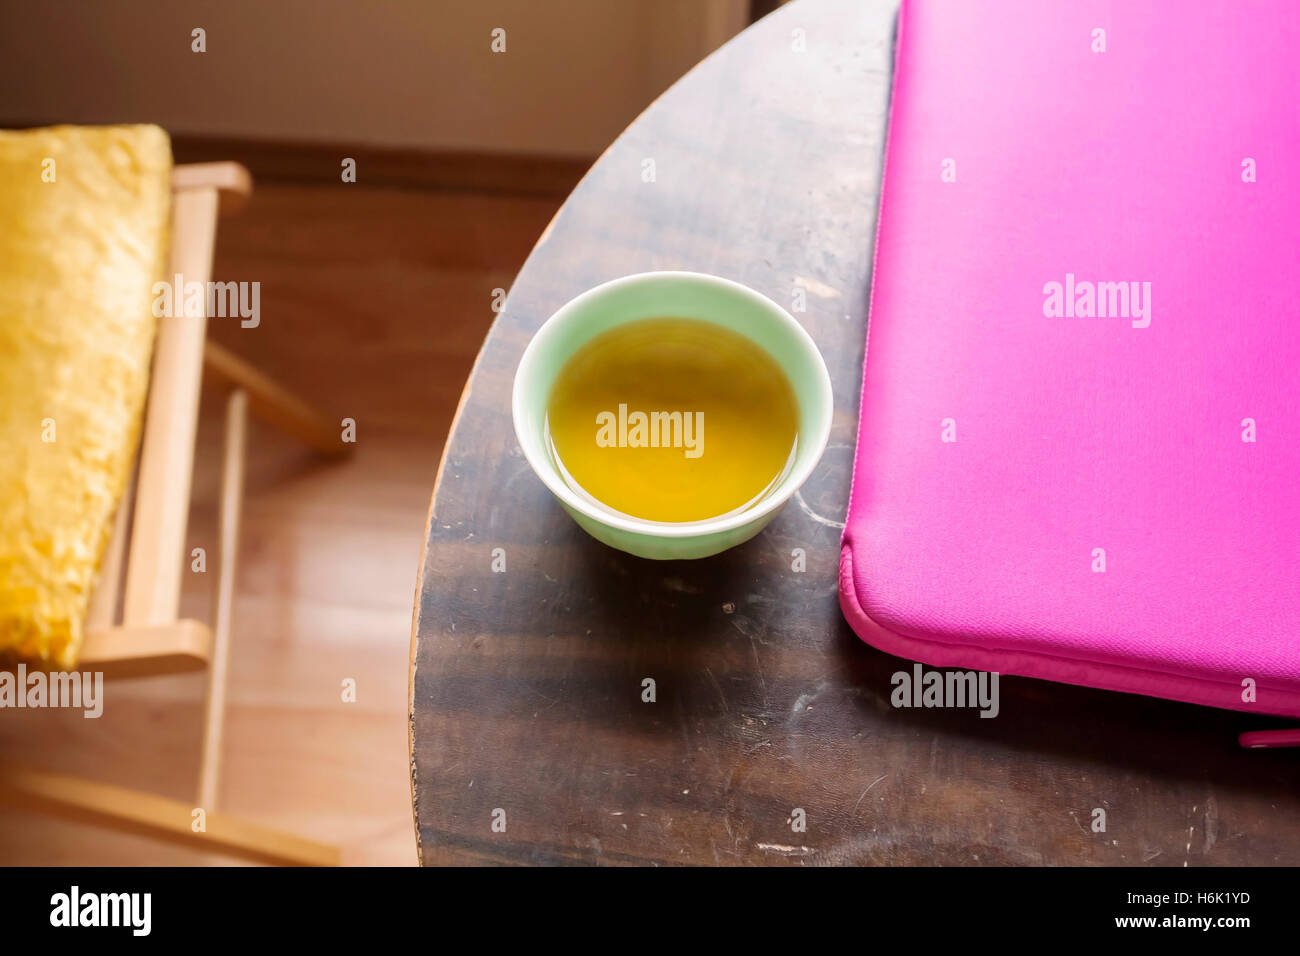 Green tea and Apple Mac Air Book in the pink case on the round table Stock Photo